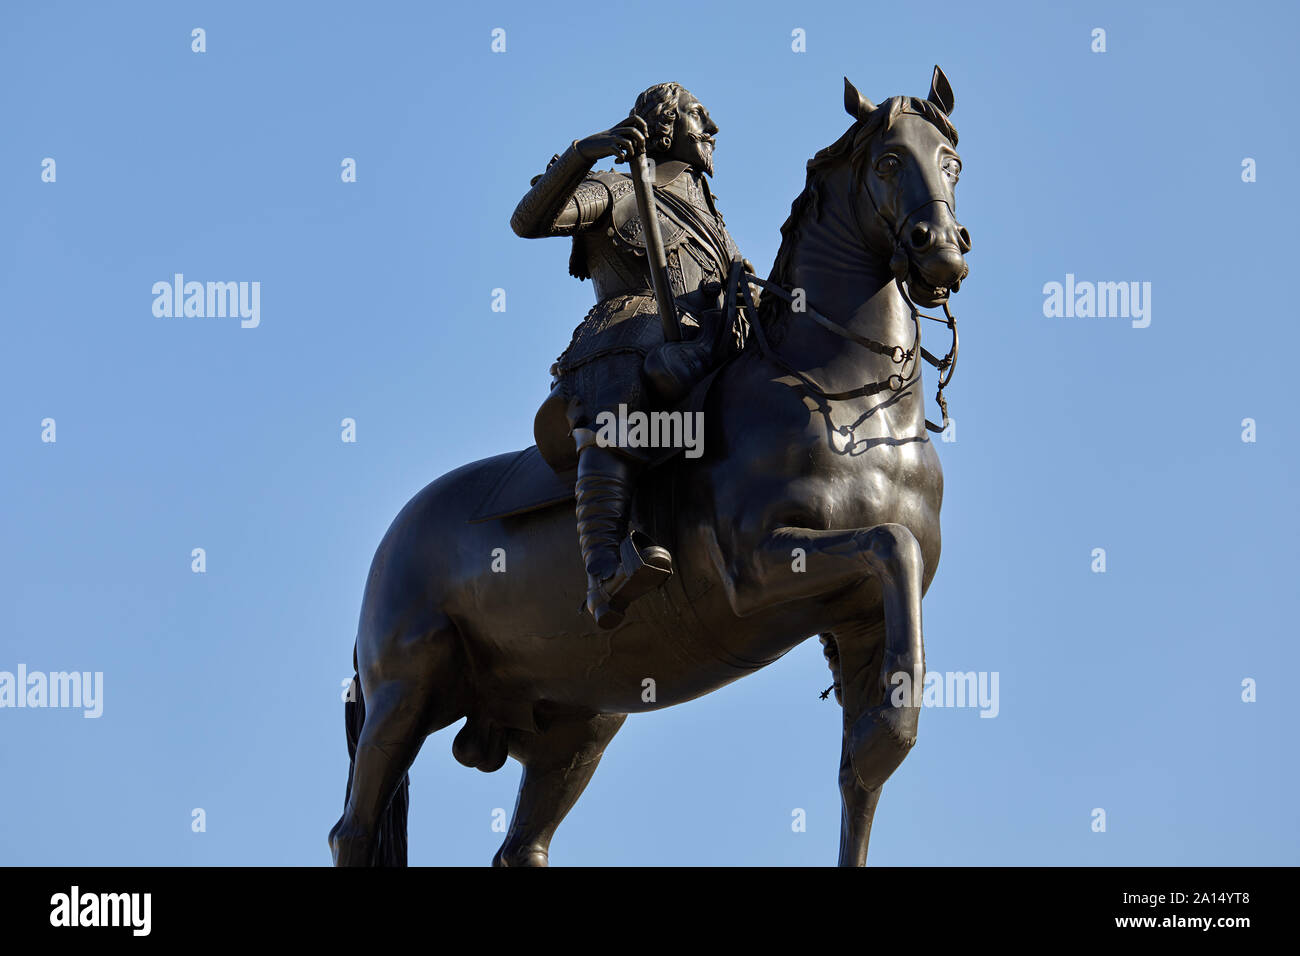 London, U.K. - Sept 18, 2019: The equestrian statue of Charles I which sits at the original site of Charing Cross, now the top of Whitehall. Designed Stock Photo